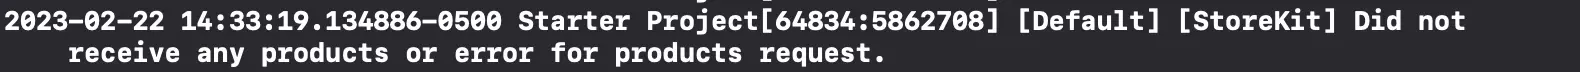 A screenshot of the error that Xcode produces that states: [StoreKit] Did not receive any products or error for products request.